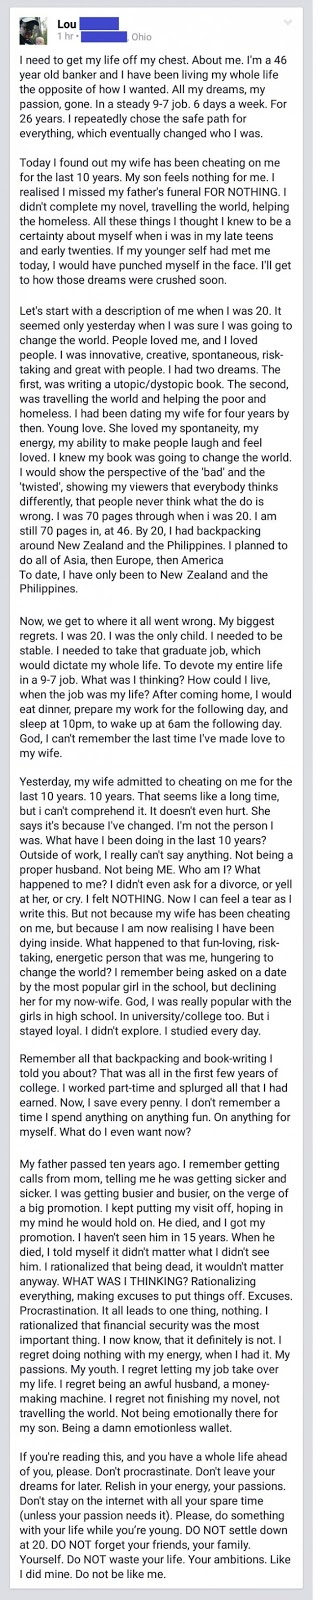 Heartbreaking Facebook Post By A Man Who Has Just Found Out His Wife's Been Cheating For 10 Years